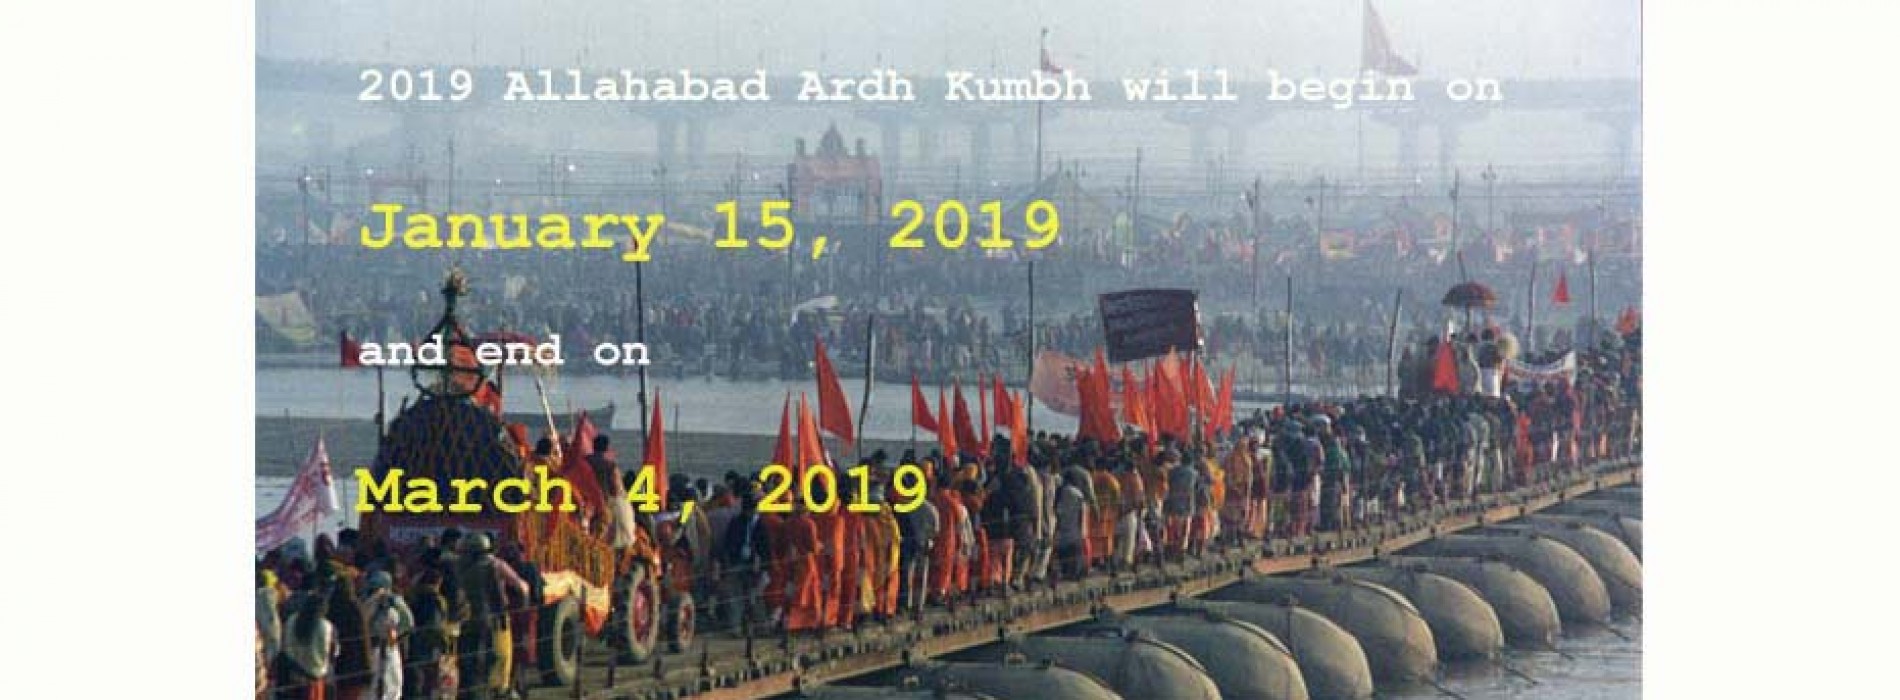 PM Modi to oversee Kumbh Mela preparations which will be held in Allahabad in 2019